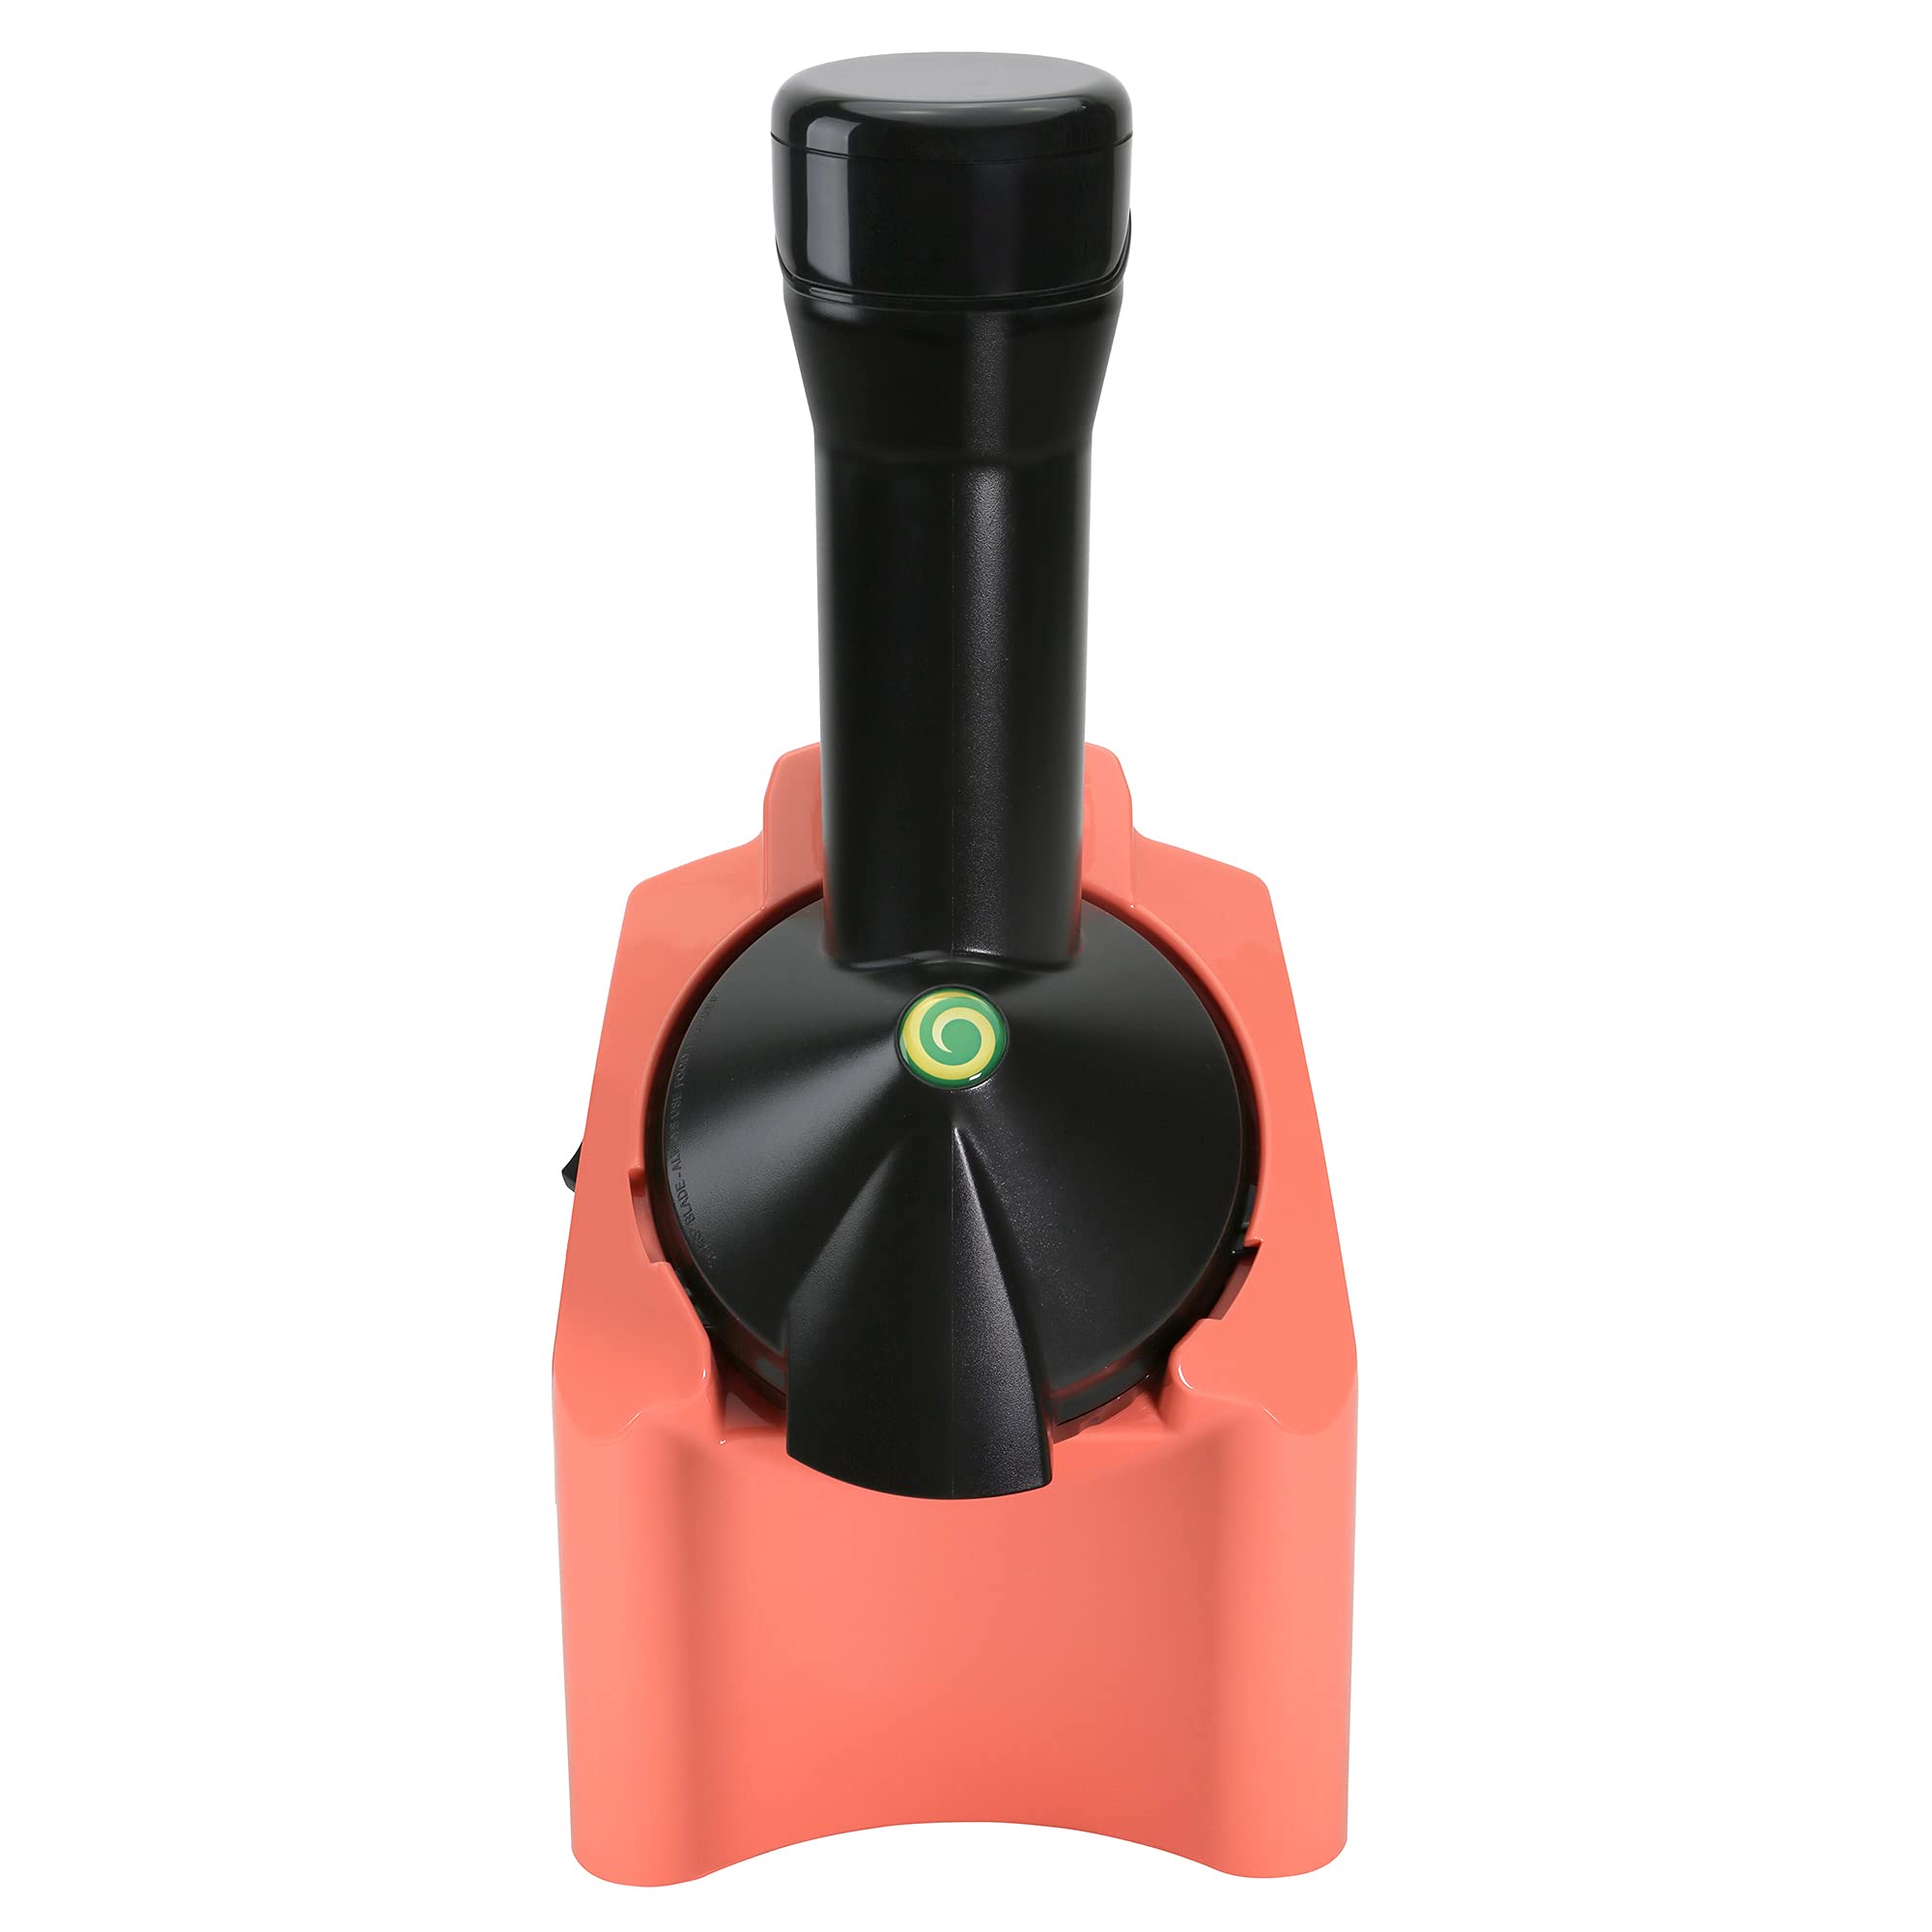 Yonanas 902cR classic Vegan, Dairy-Free Frozen Fruit Soft Serve Maker, Includes 36 Recipes, 200-Watts, coral